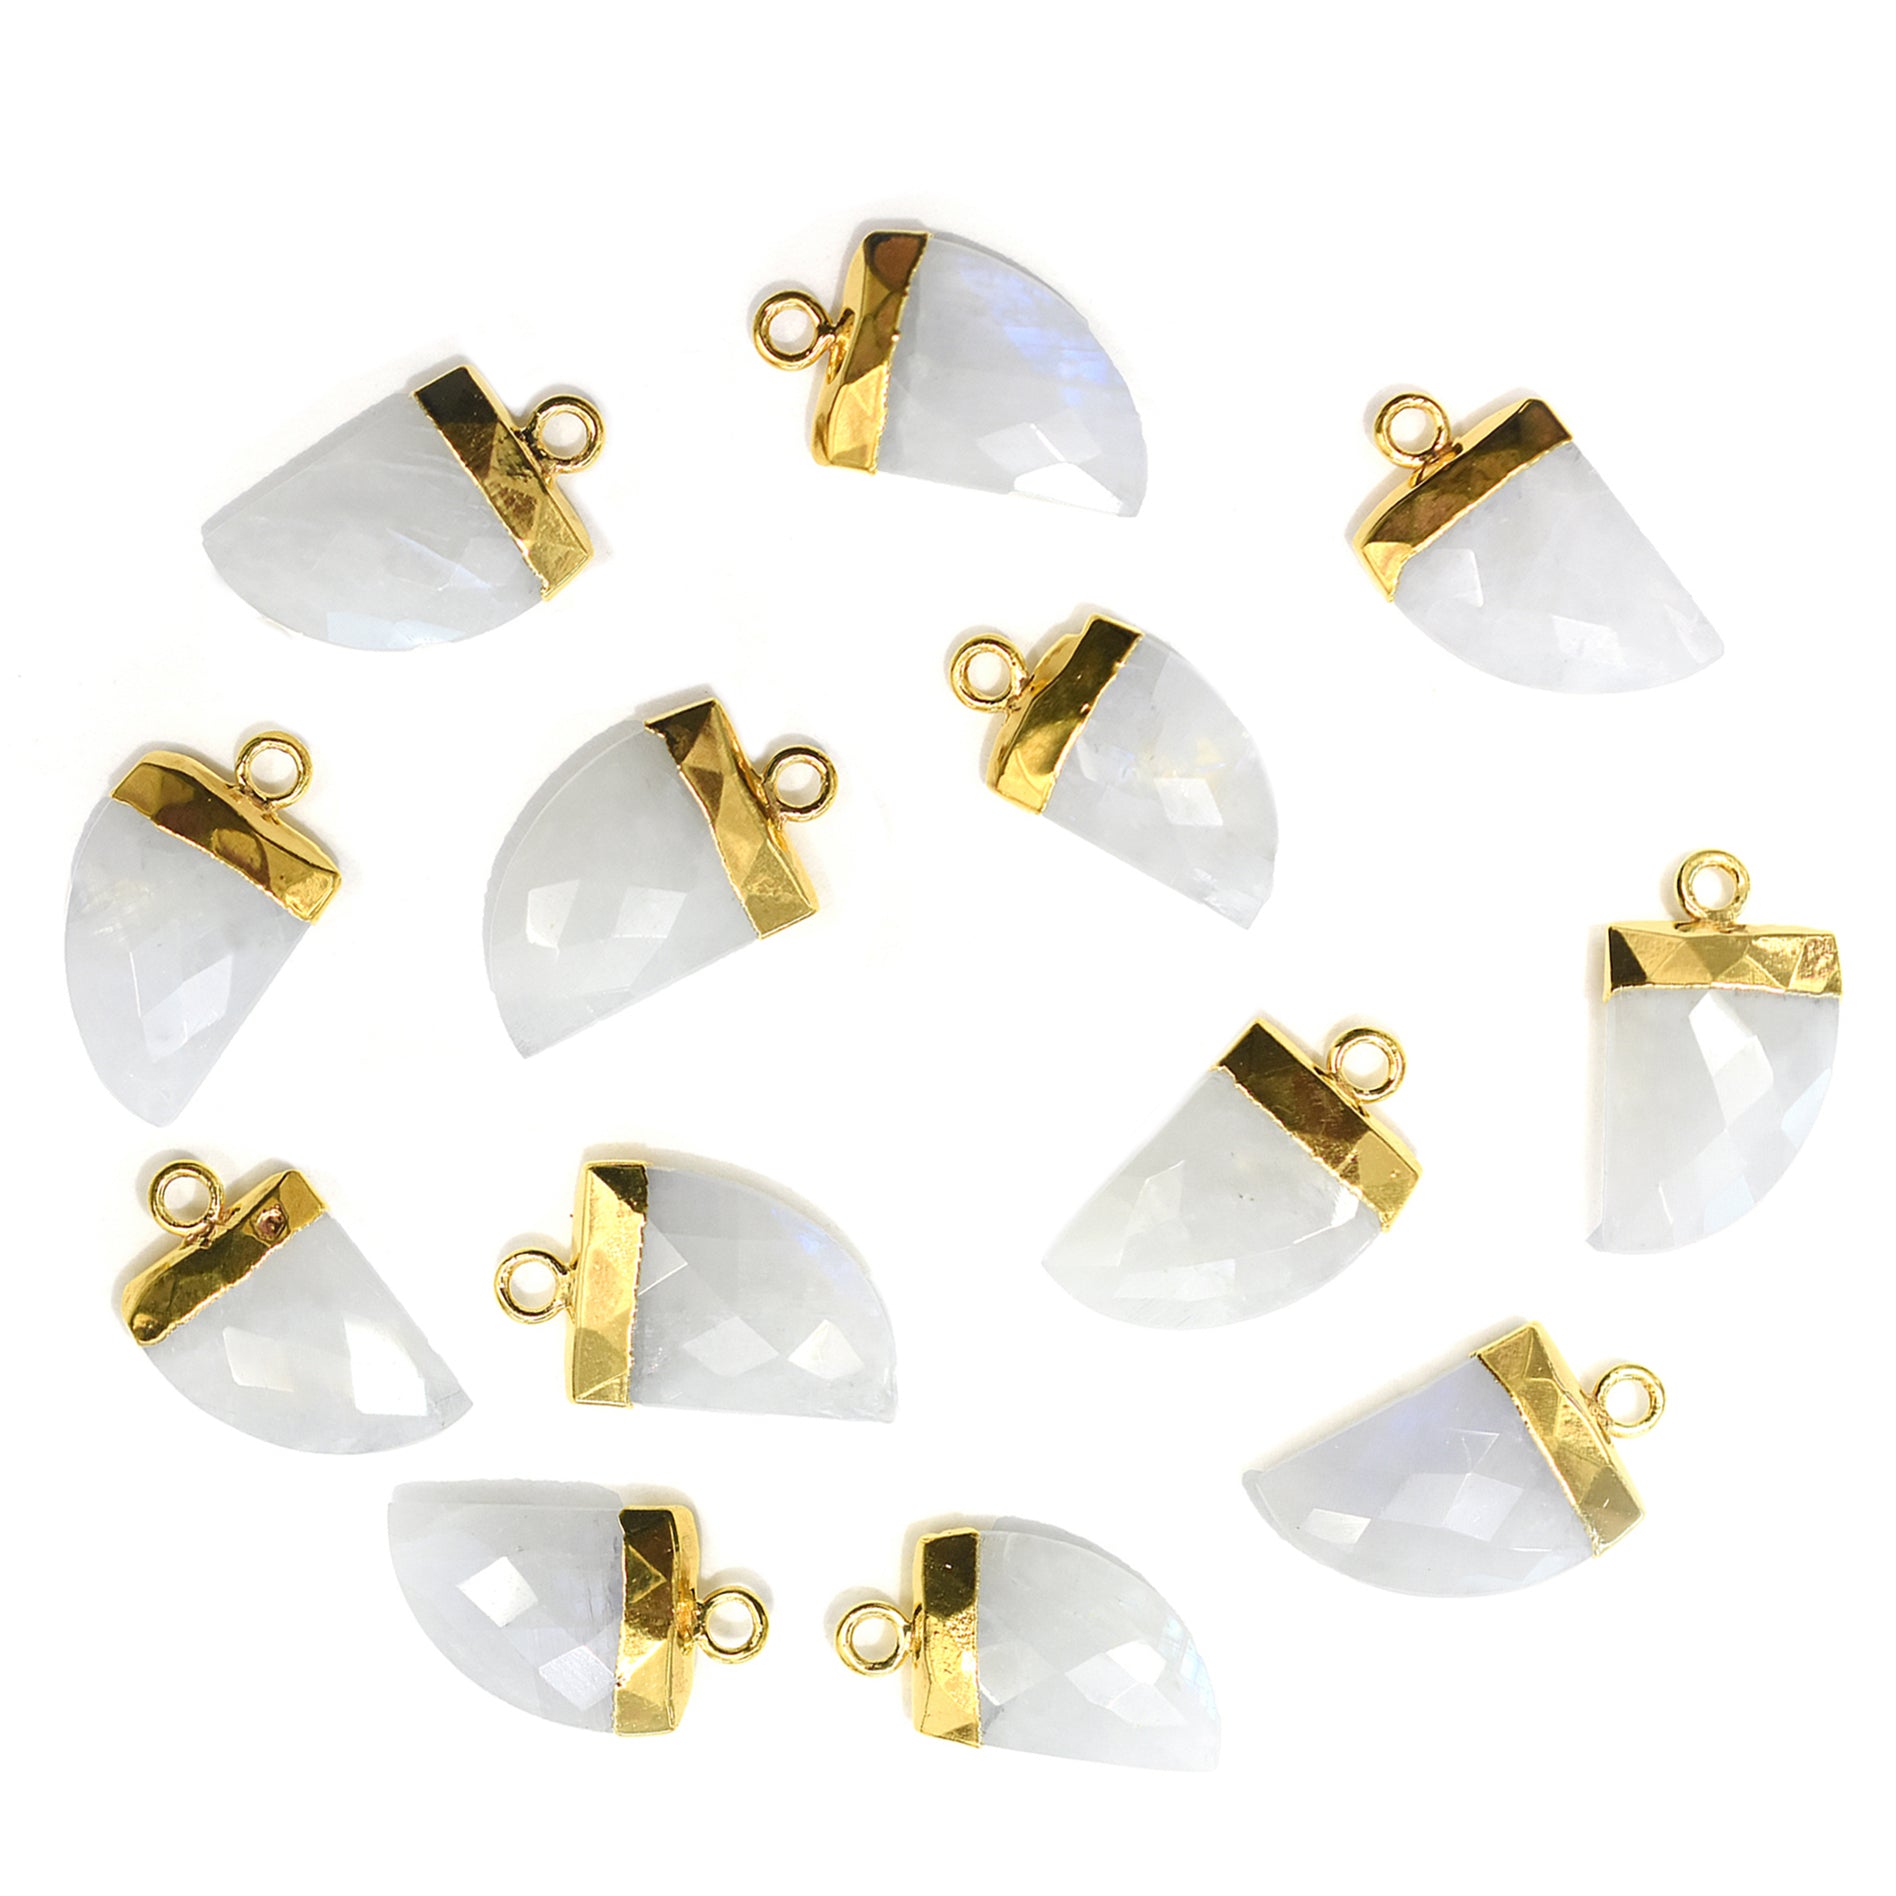 Rainbow Moonstone 14X10 MM Horn Shape Gold Electroplated Pendant